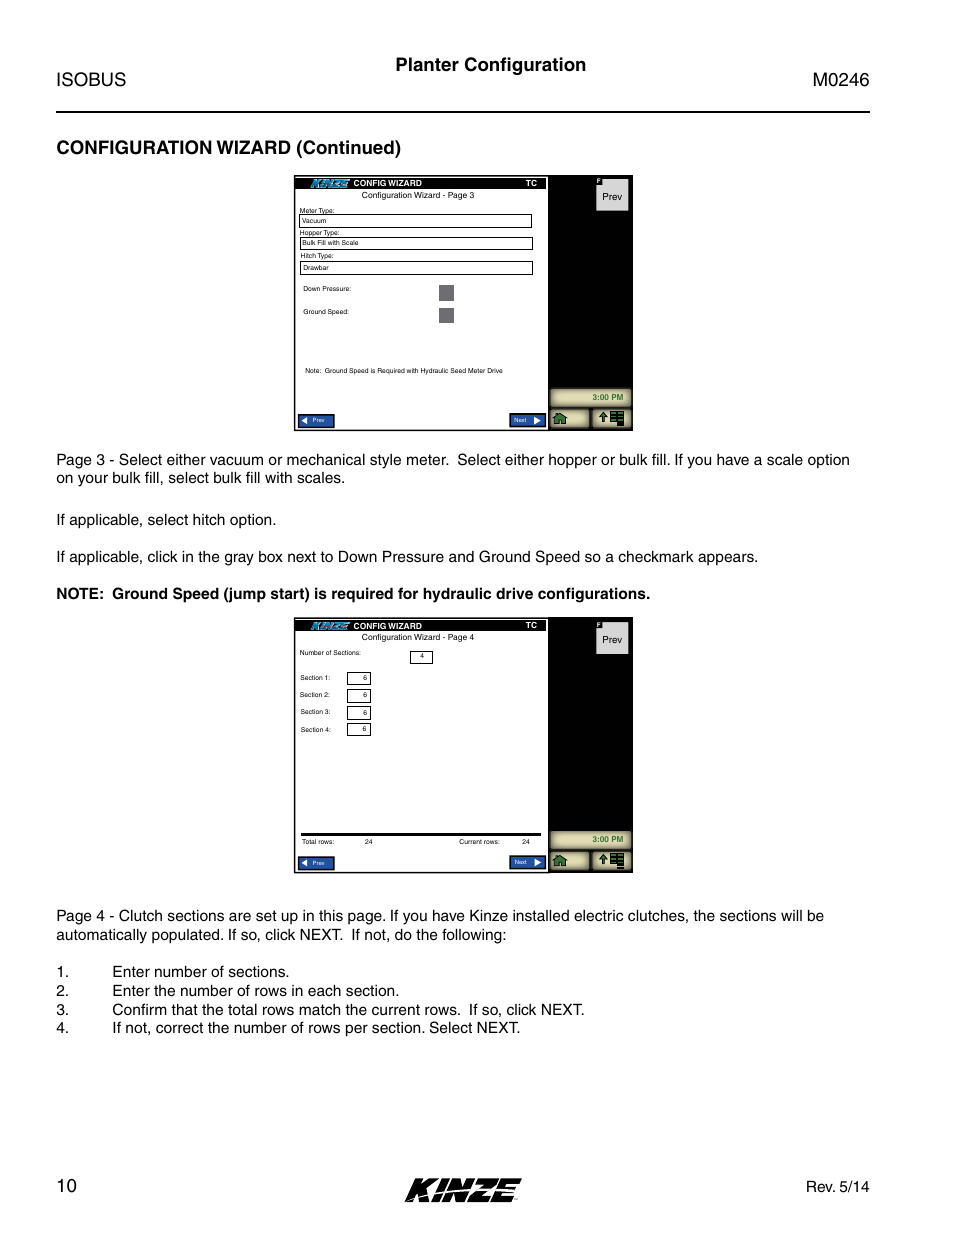 Configuration wizard (continued), Planter configuration, Rev. 5/14 | Kinze ISOBUS Electronics Package (3000 Series) Rev. 5/14 User Manual | Page 16 / 46